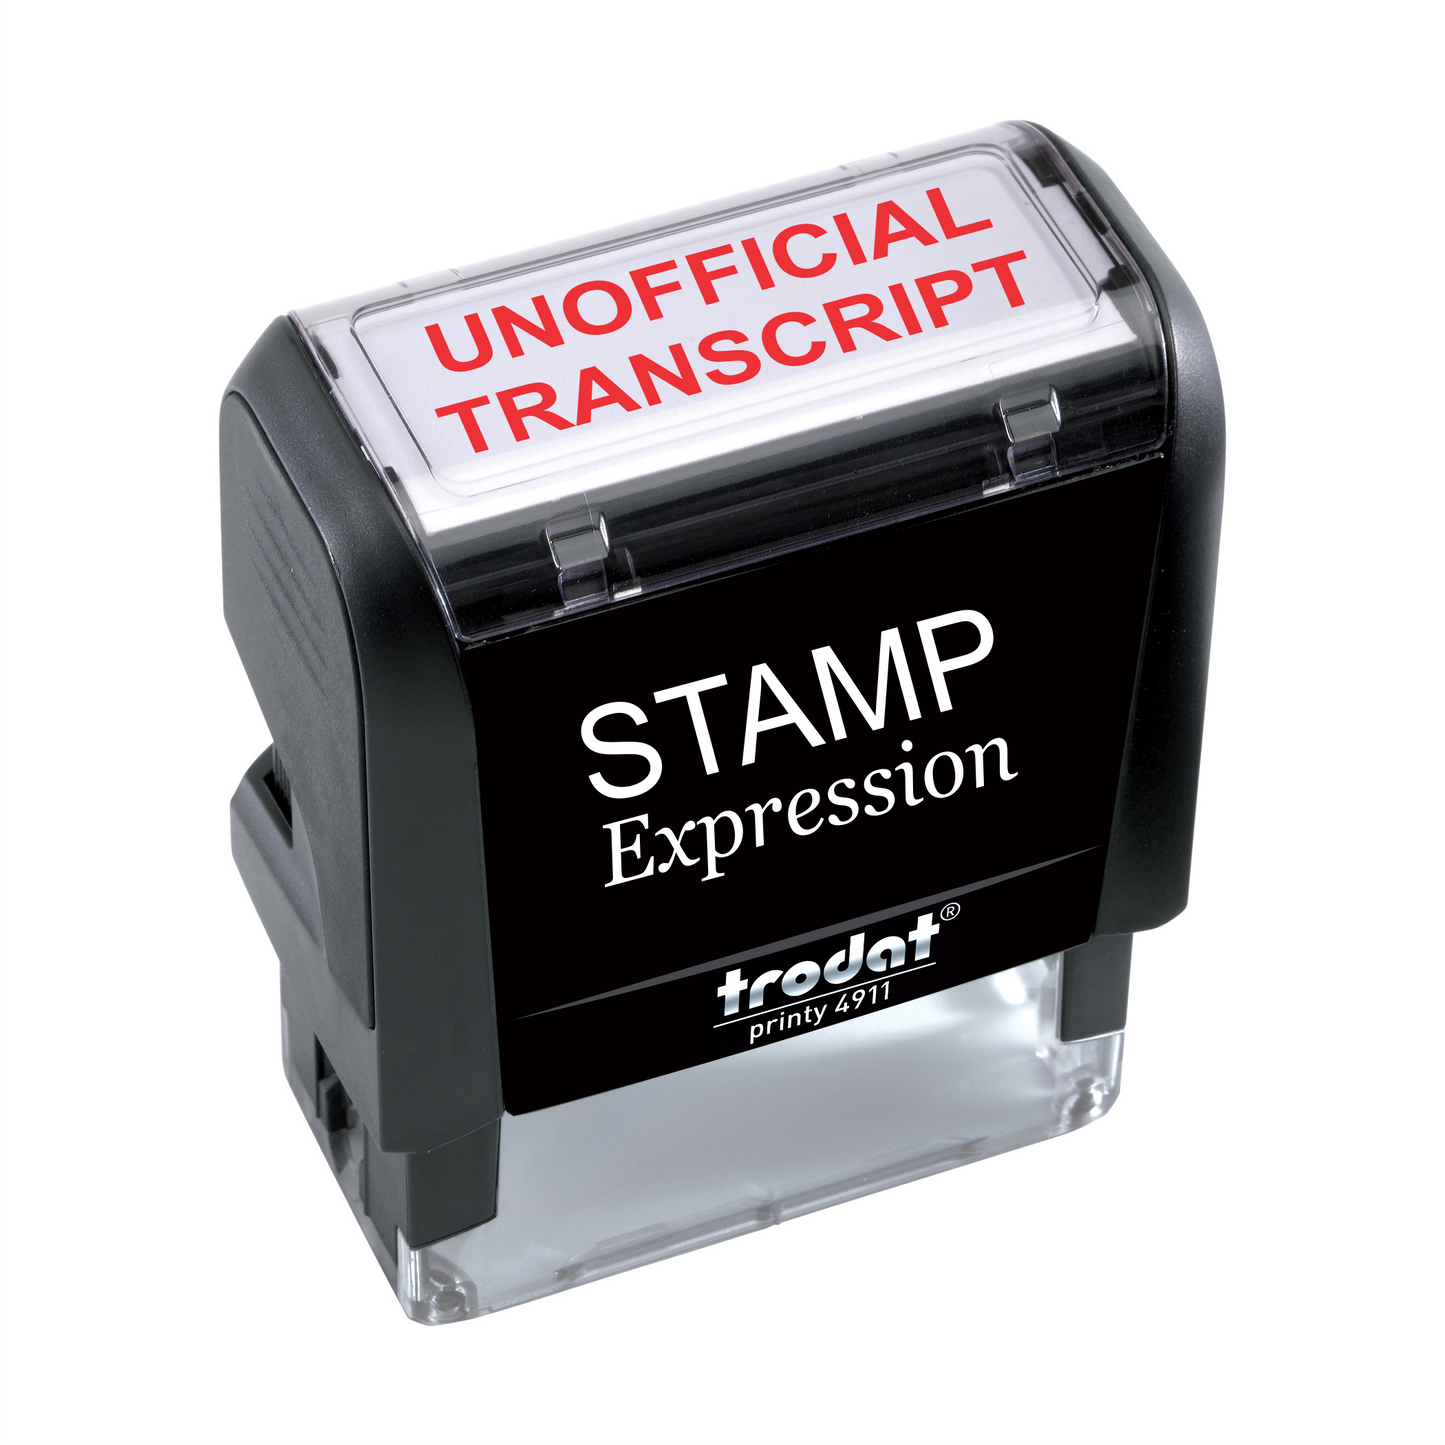 Unofficial Transcript Office Self Inking Rubber Stamp (SH-5791)